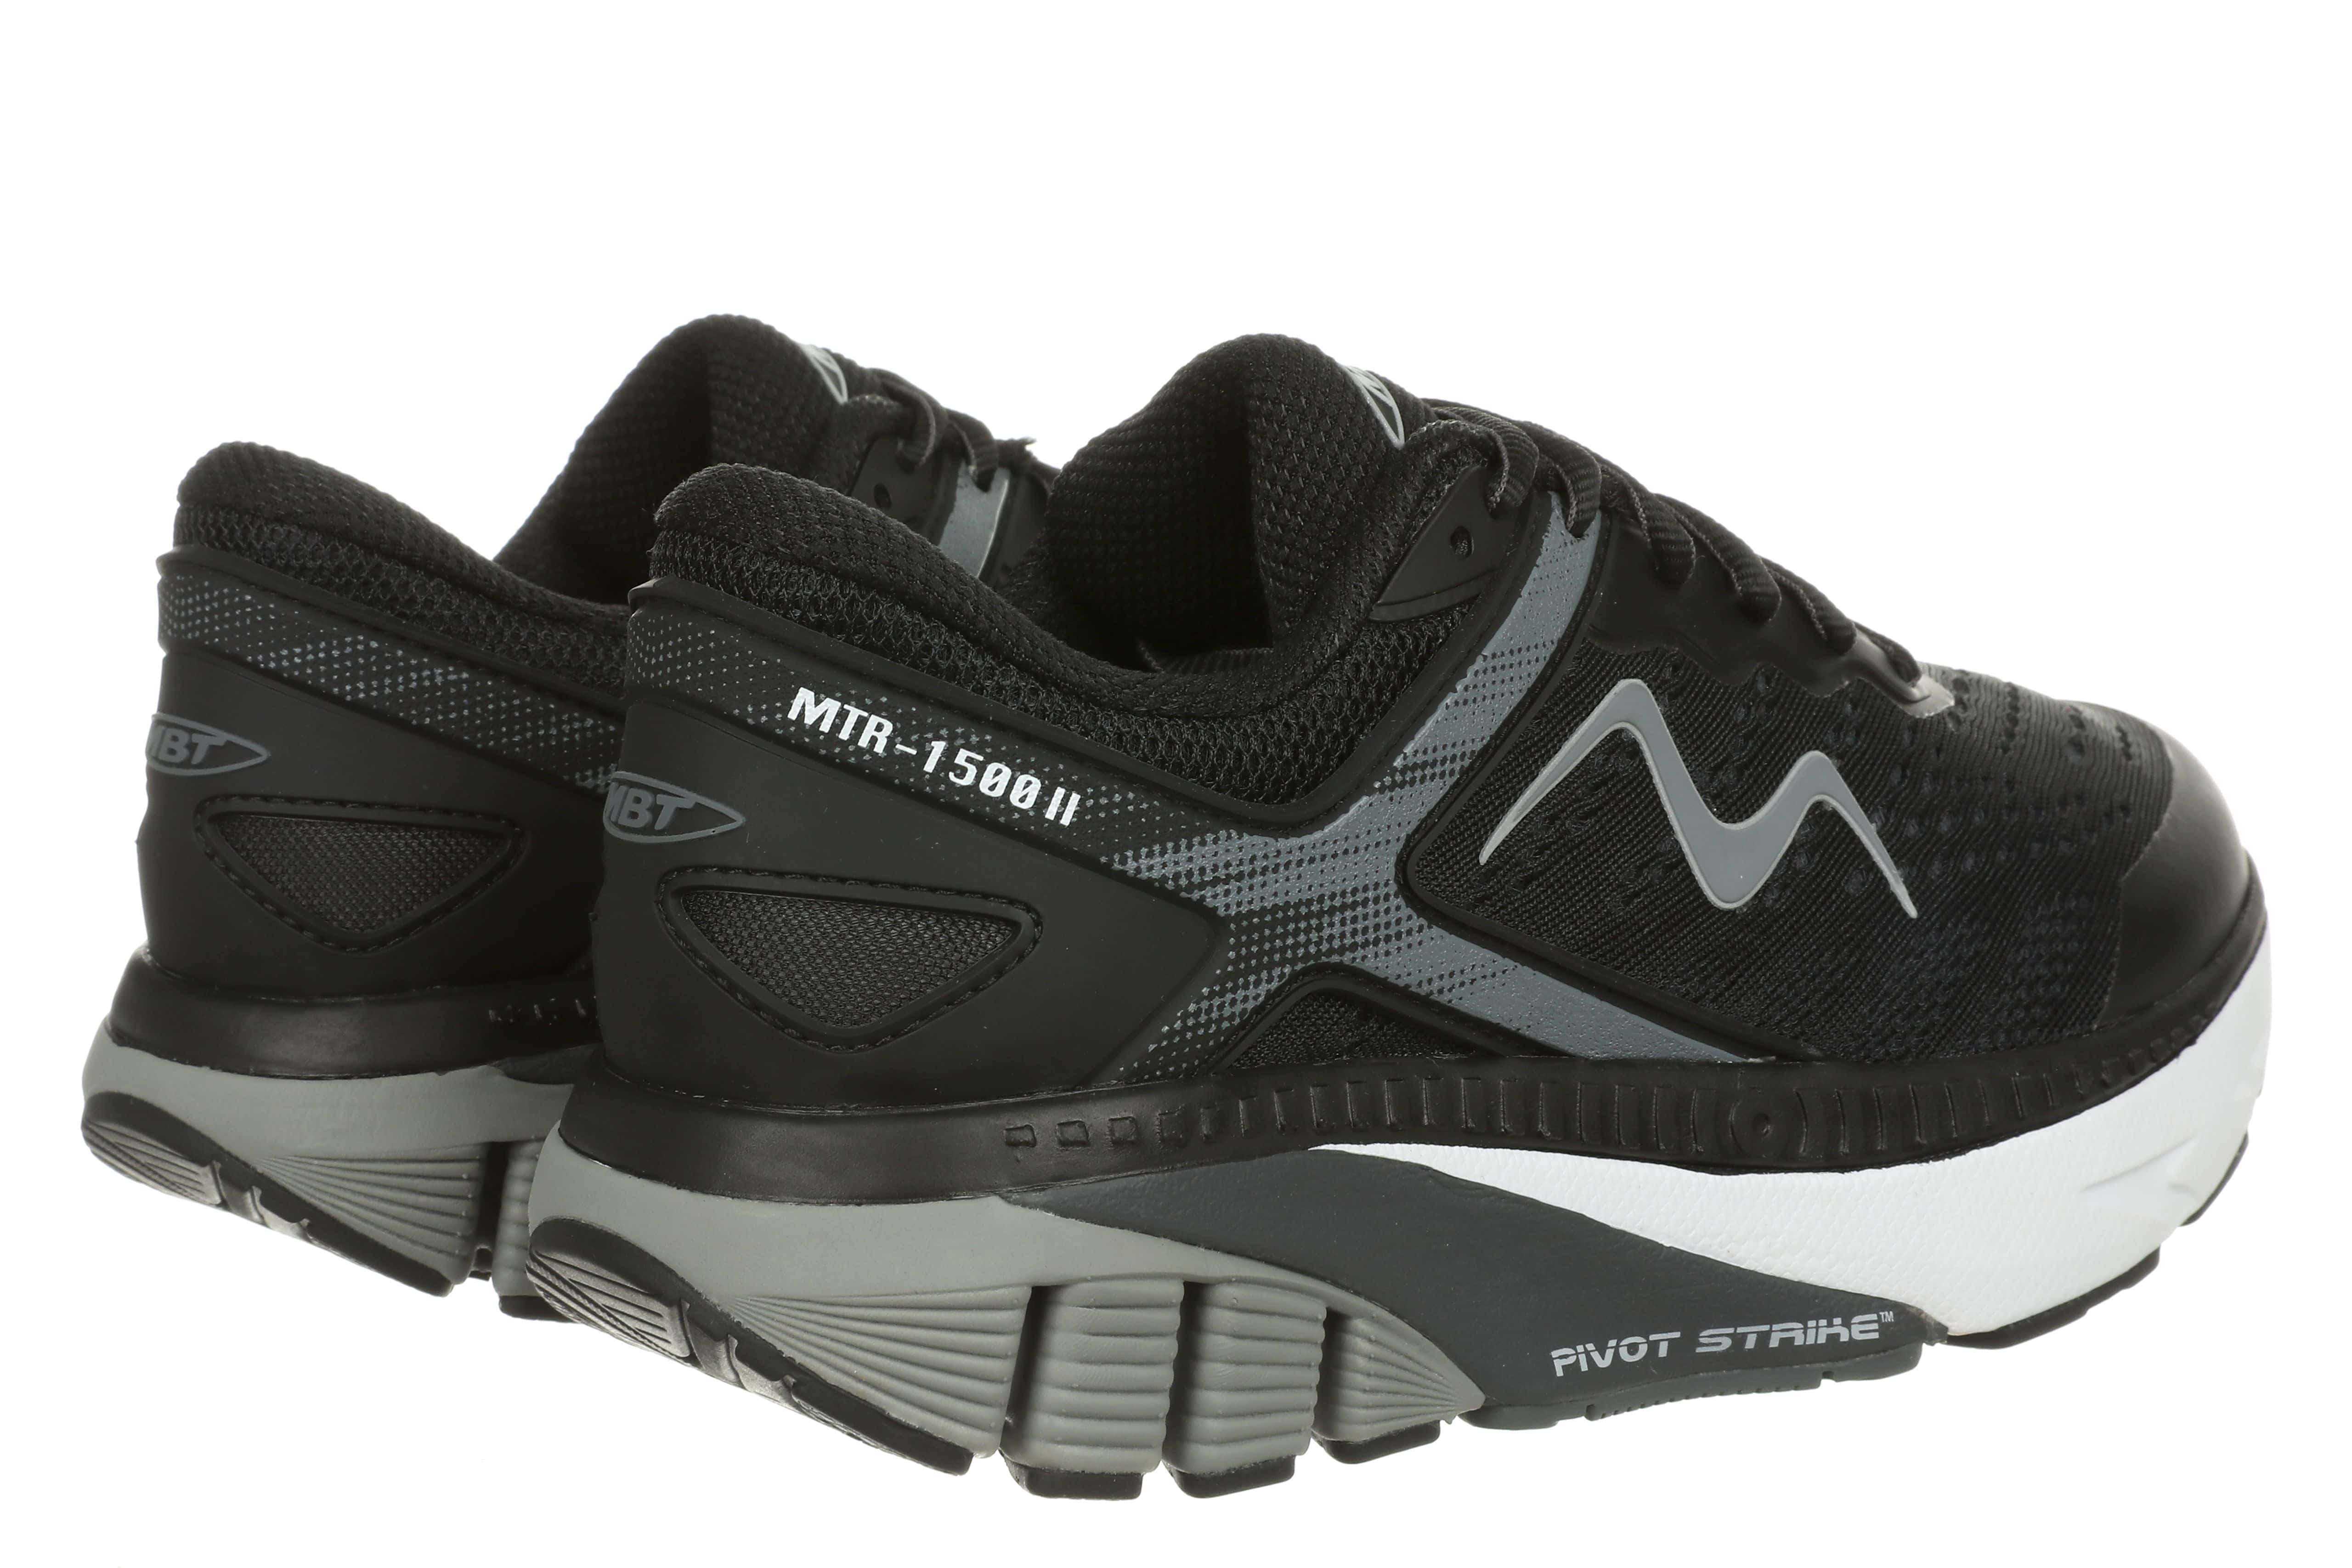 MBT SNEAKERS WOMAN MTR-1500 II LACE UP